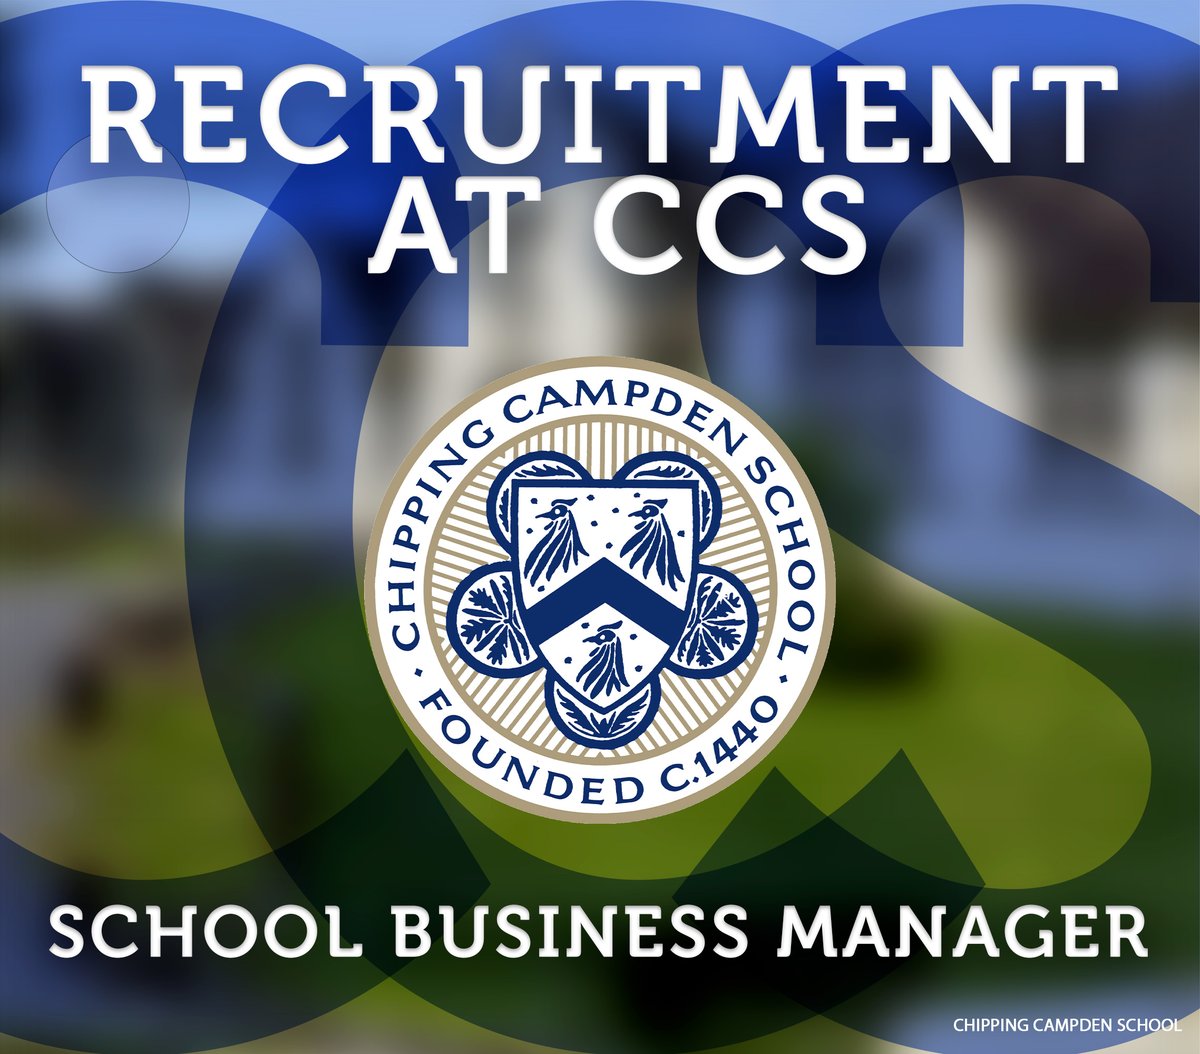 Chipping Campden School is seeking a School Business Manager to contribute to our vibrant educational community. For more information and to apply, please visit our website: campden.school  #SchoolBusinessManager #JobOpening #ChippingCampden